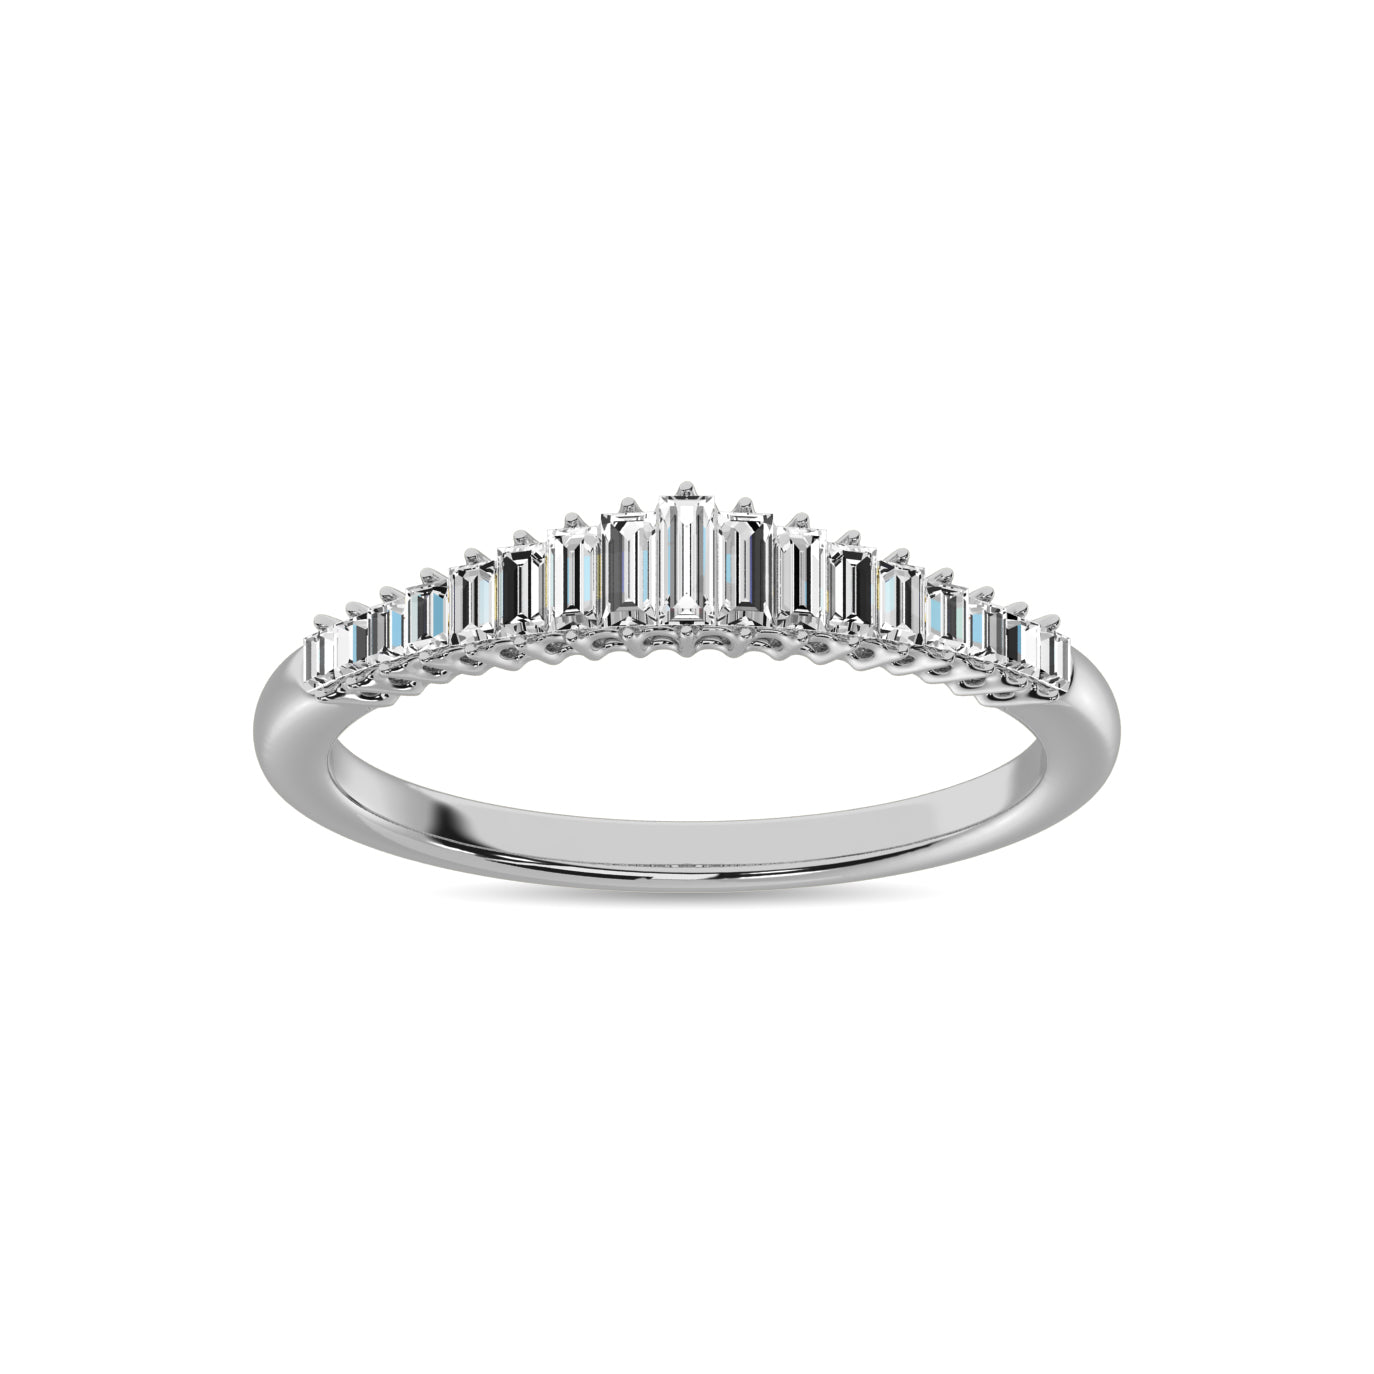 Diamond 1/5 ct tw Round and Baguette Anniversary Ring  in 10K White Gold